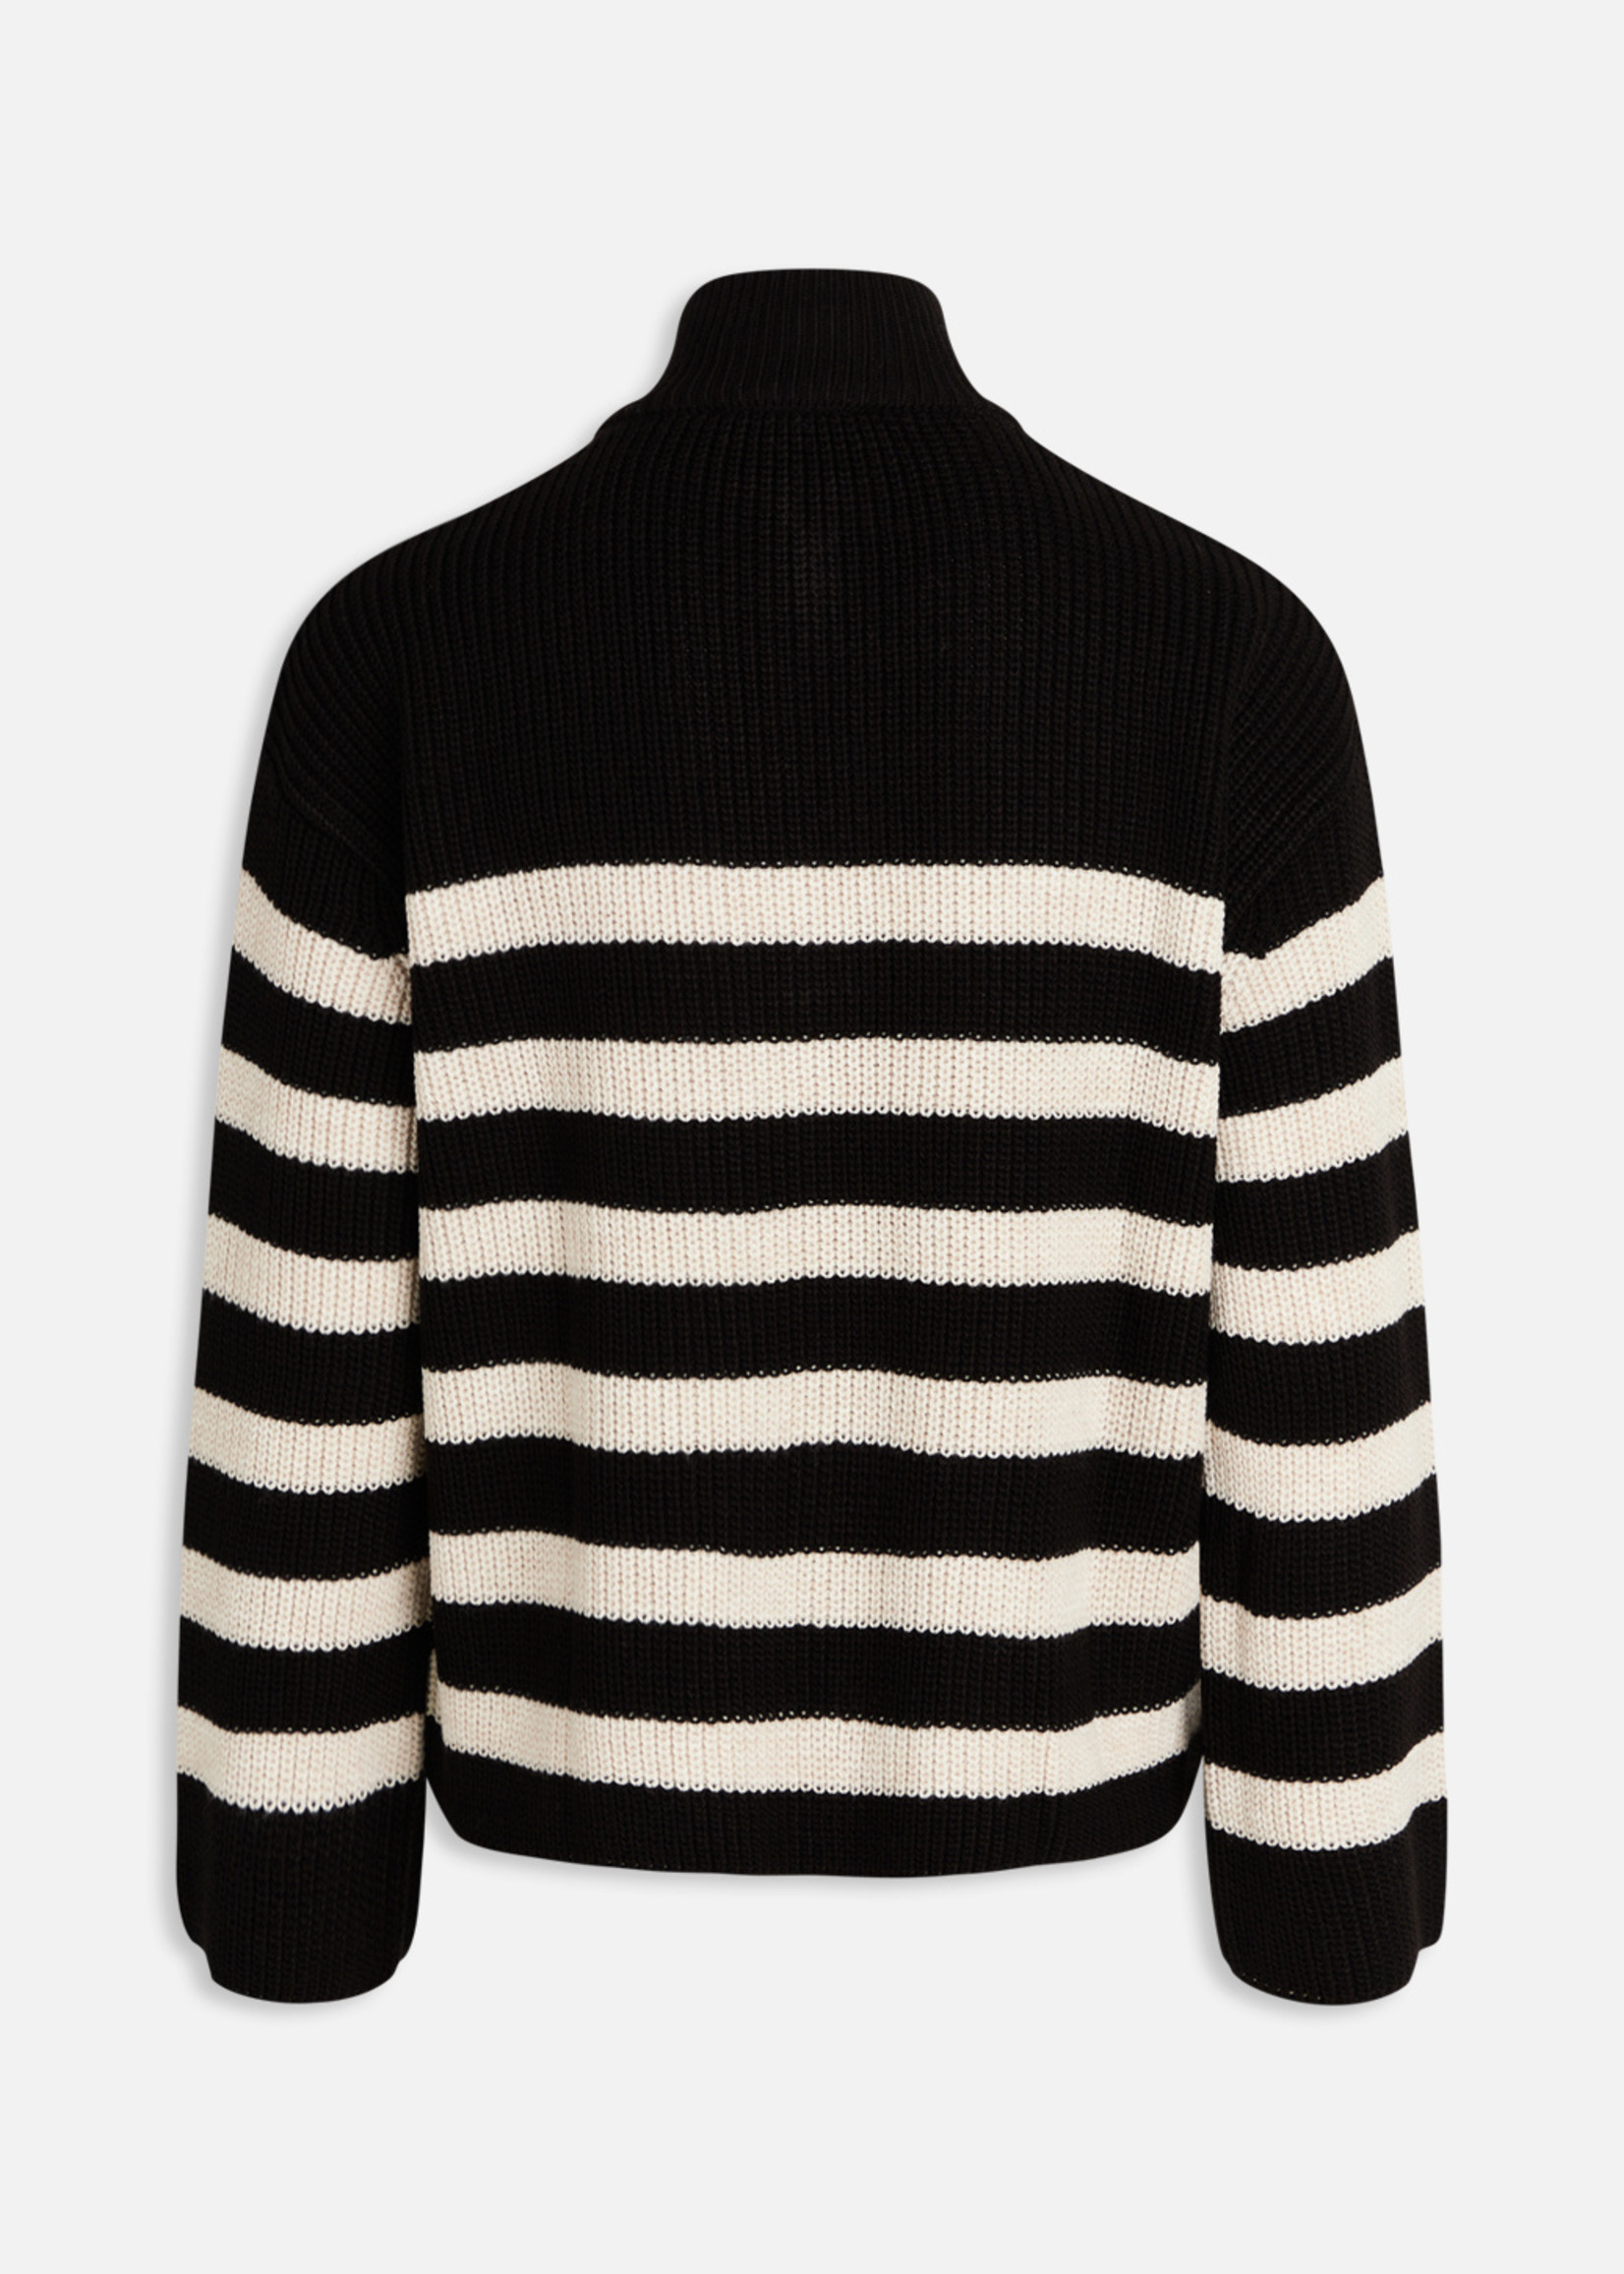 SISTERS POINT Black Bamboo Knit Sweater